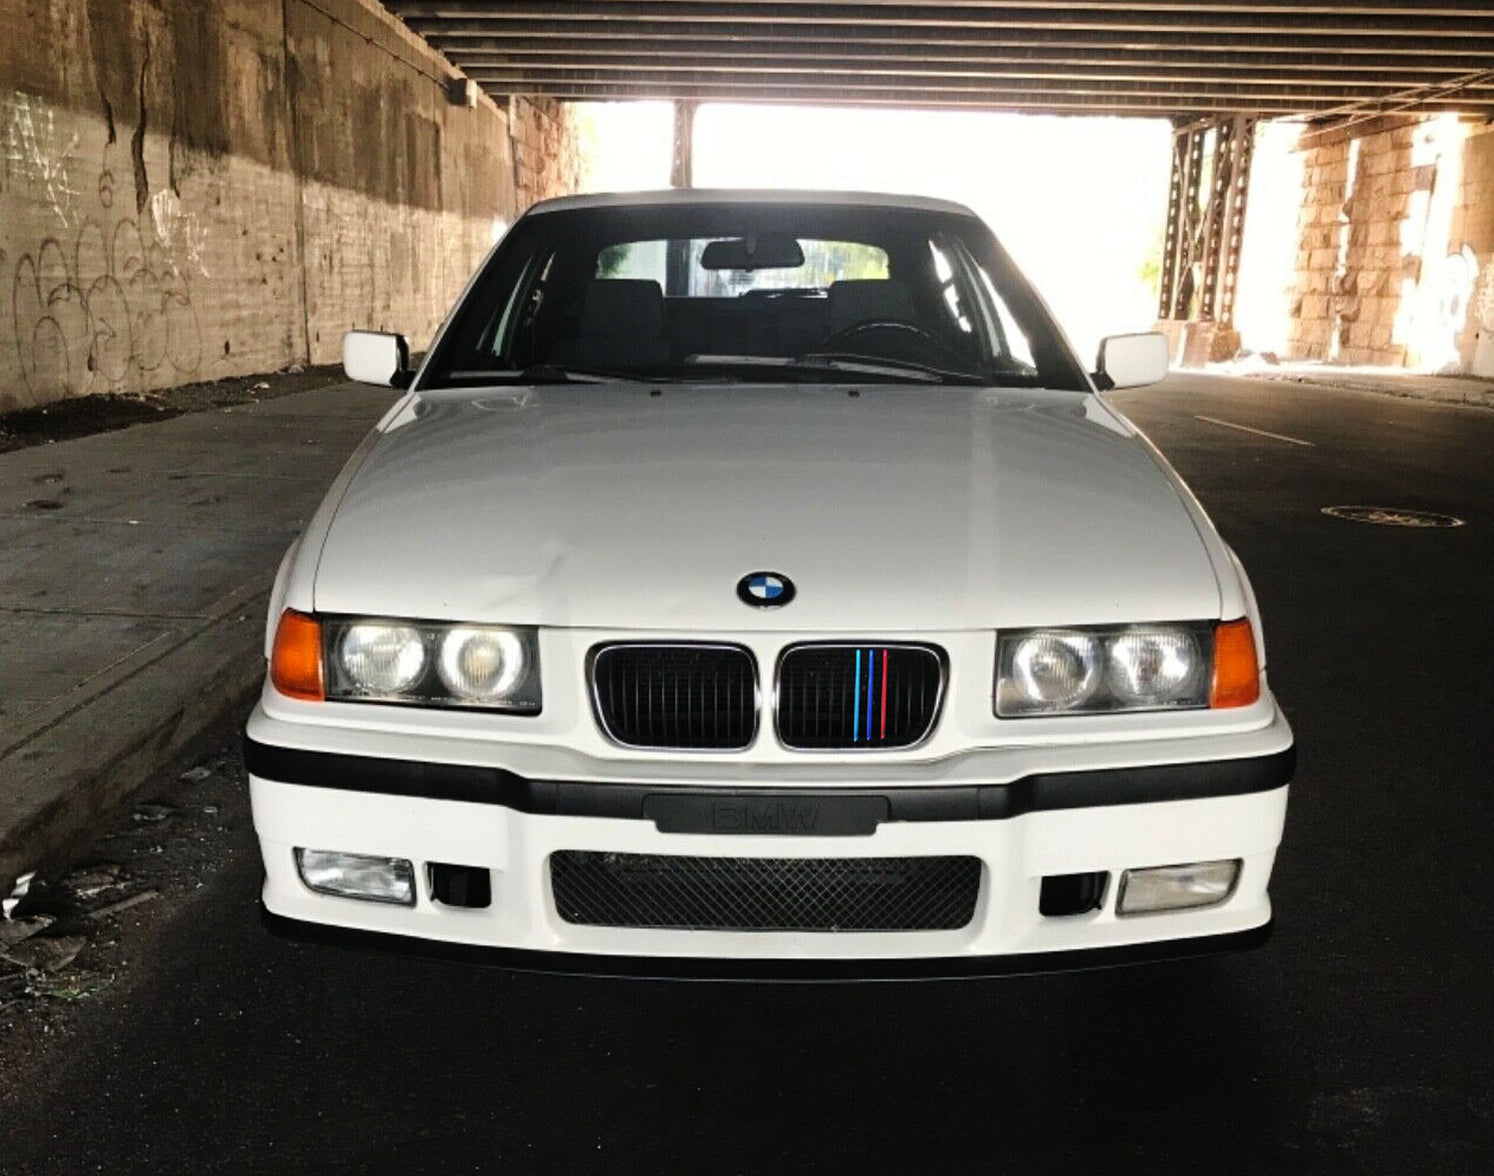 ///MColor Grille Insert Trims For 9699 BMW E36 3 Series